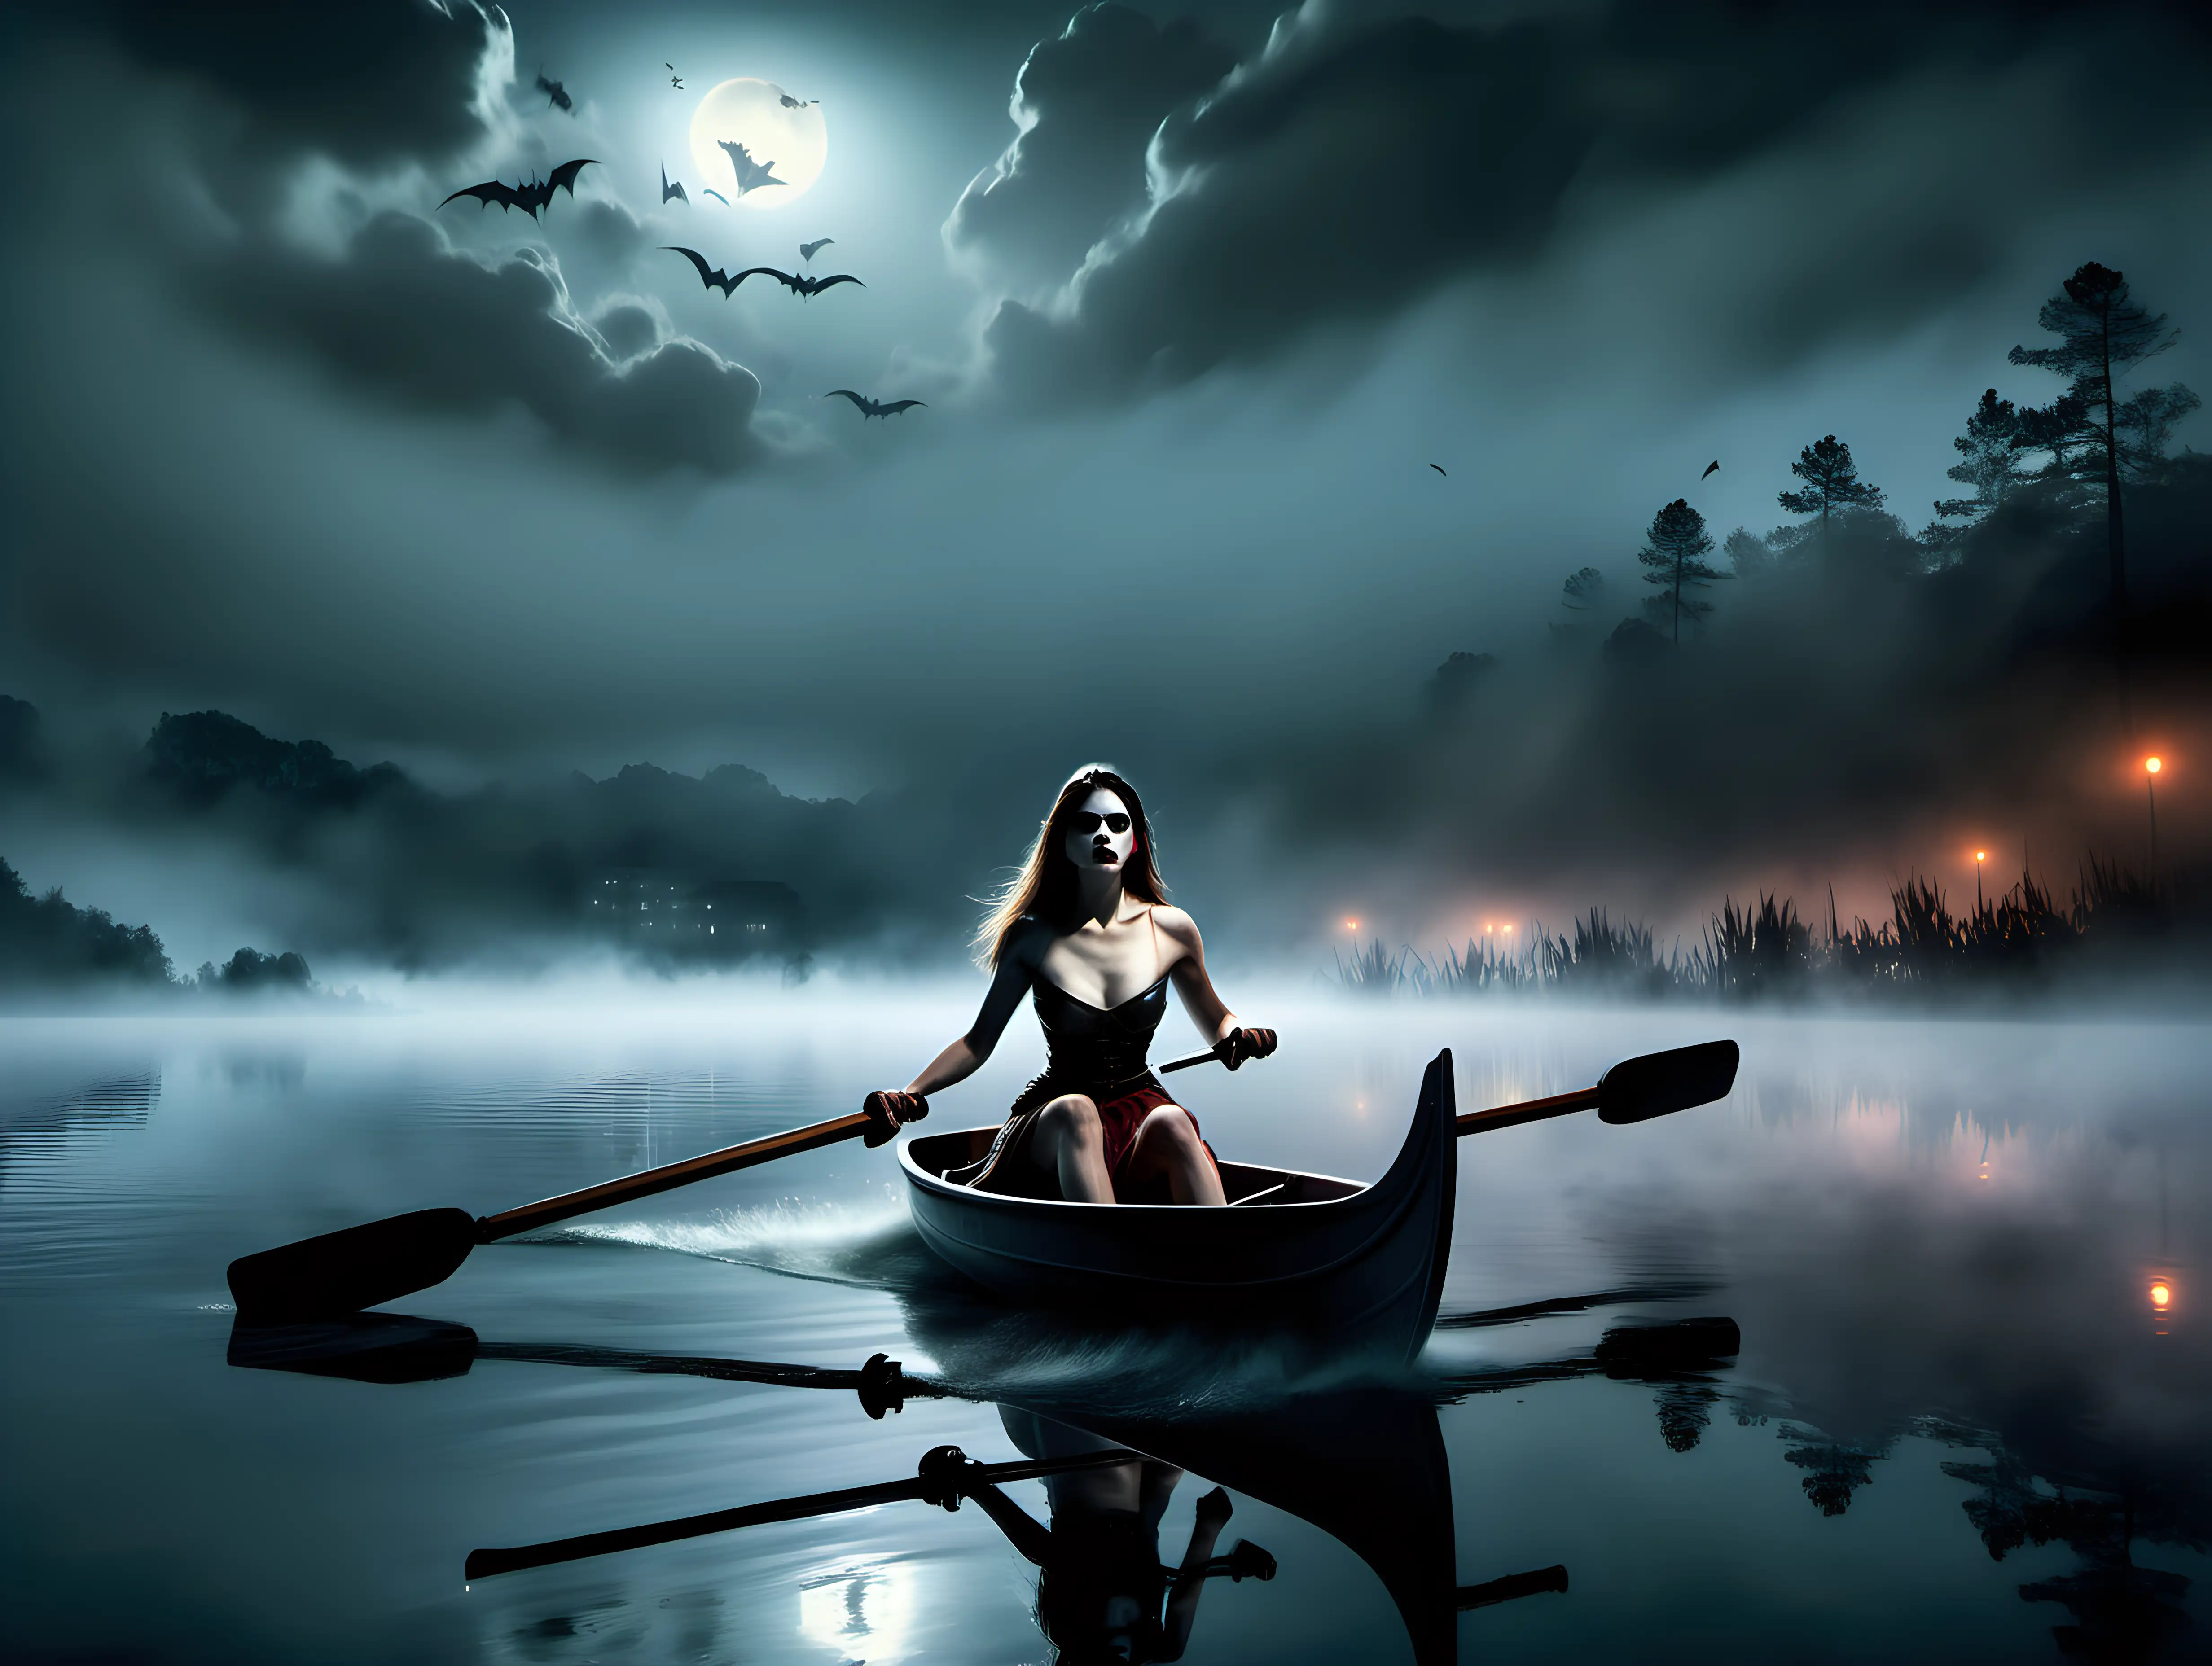 Enchanting Night Rowing Young Woman in Heavy Fog with Vampire Bats